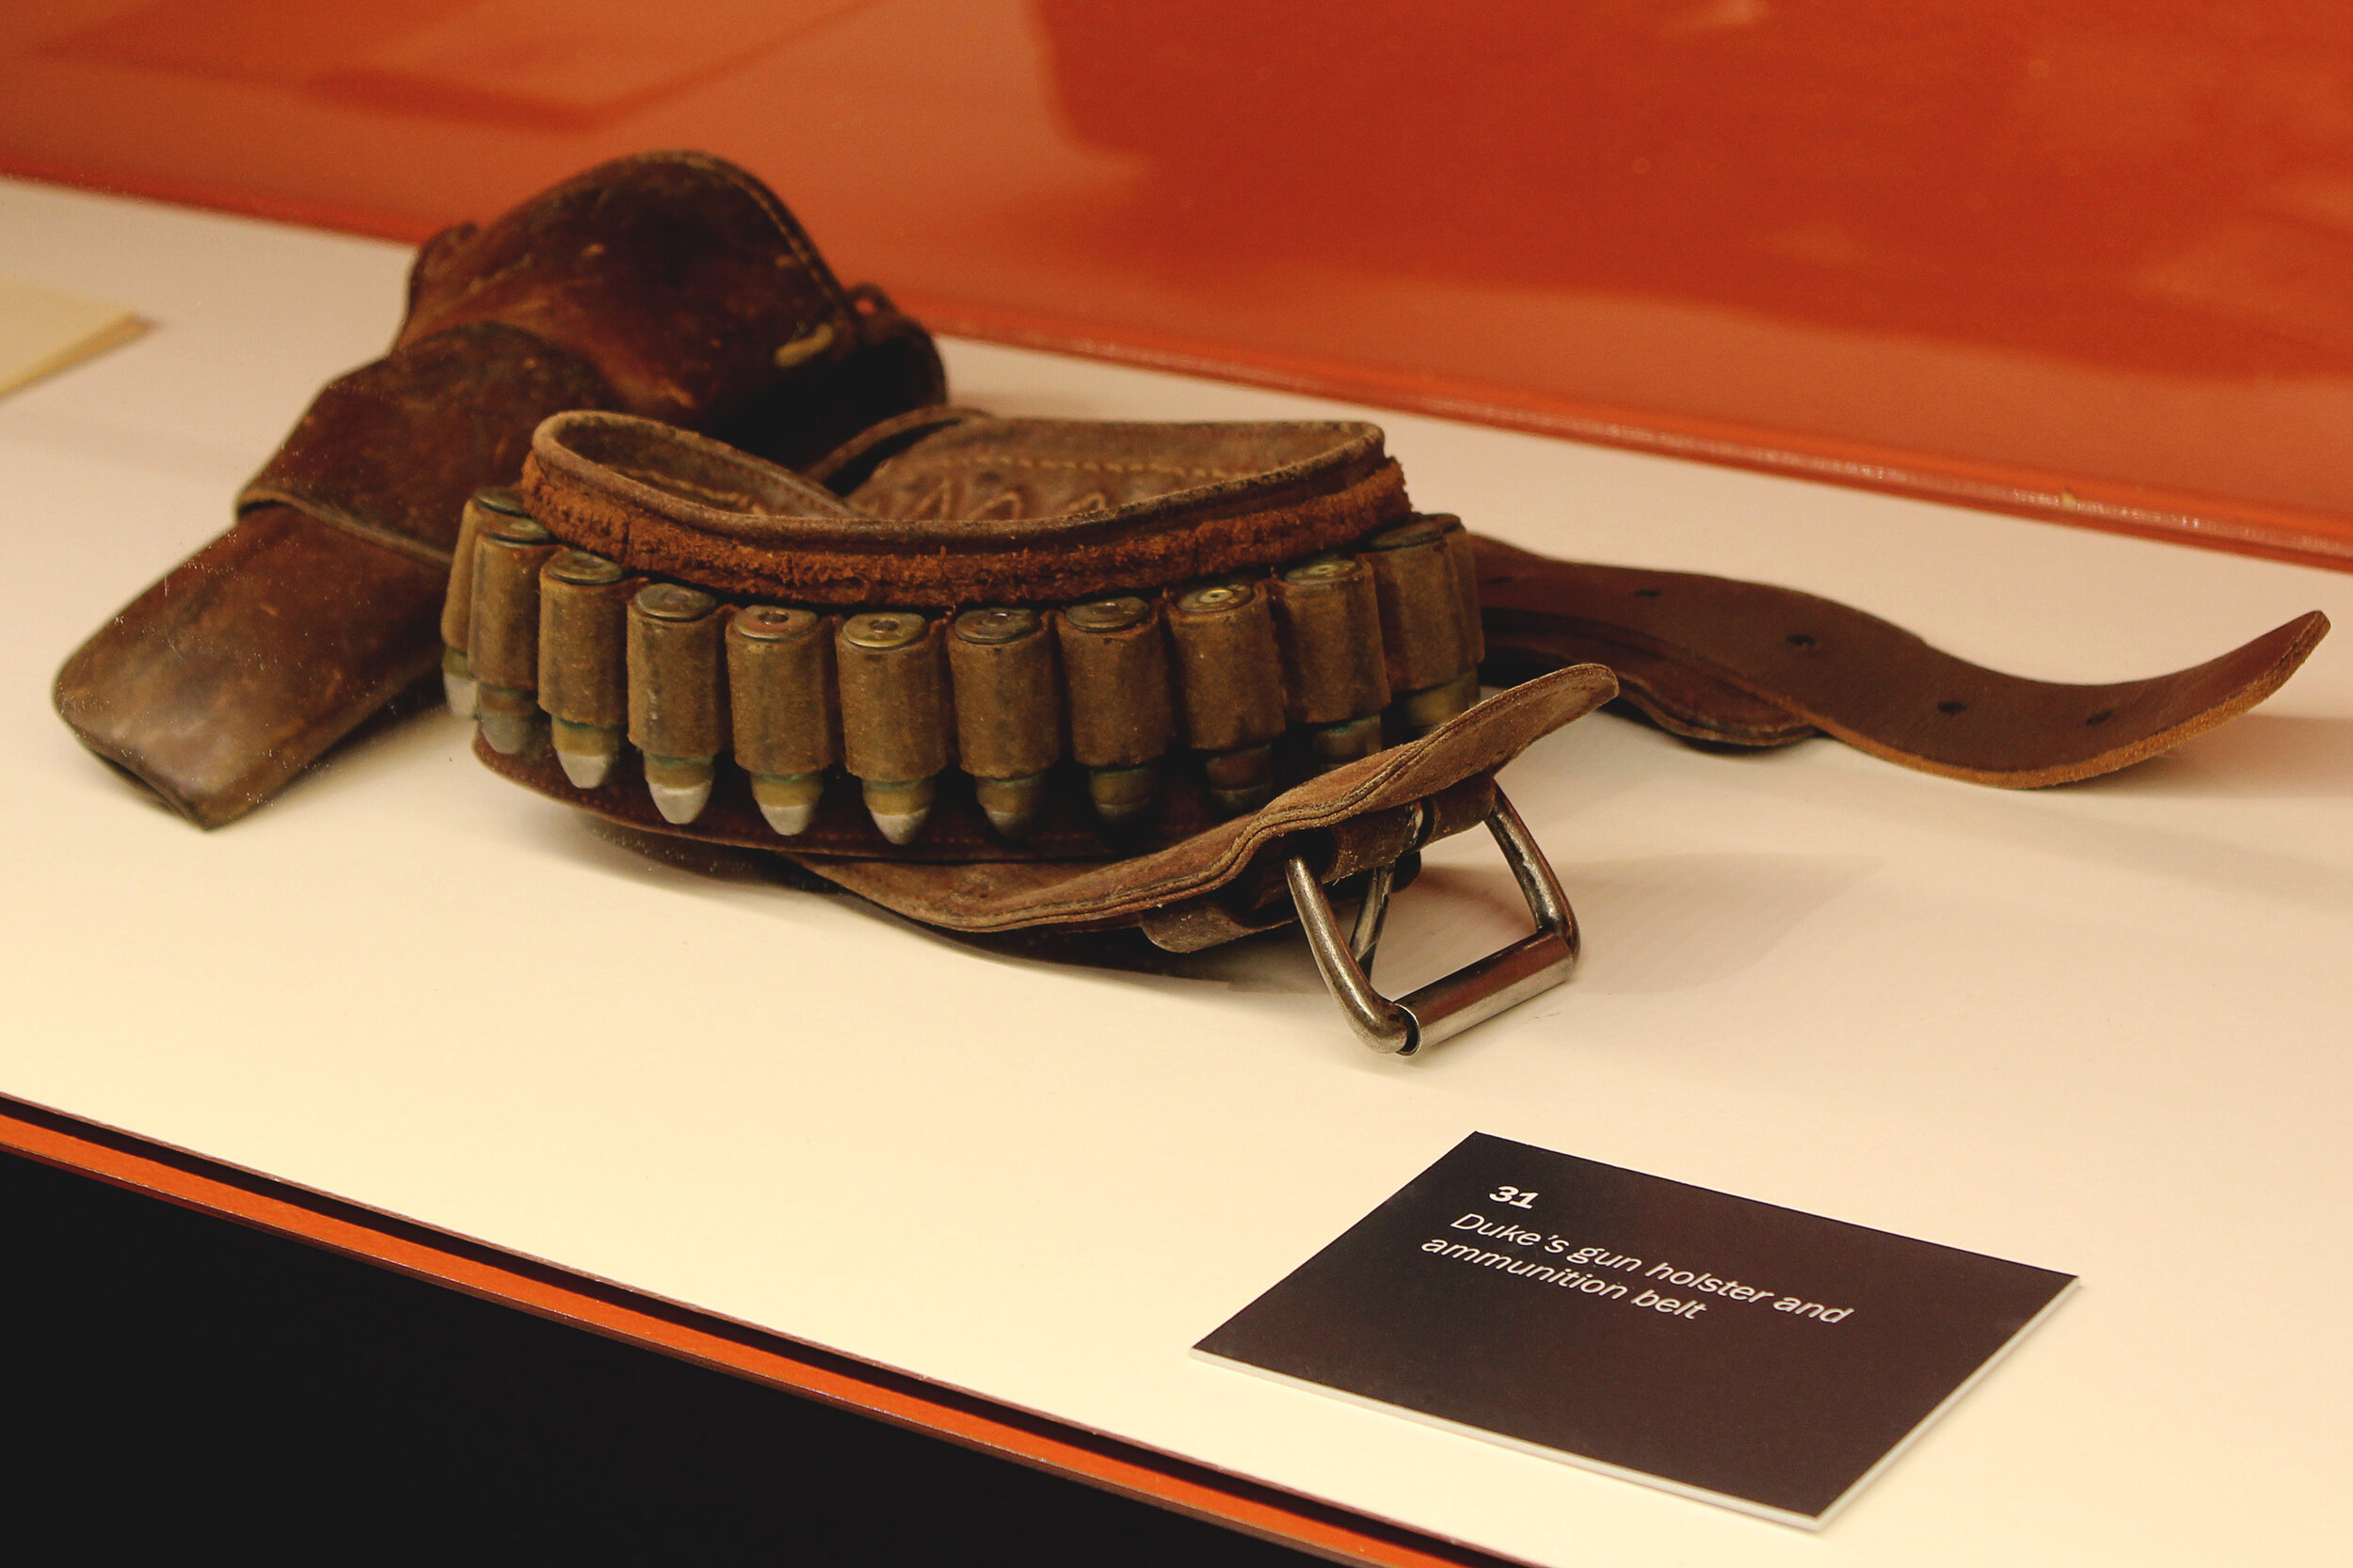 John Wayne’s gun holster and ammunition belt on display at an exhibit in Nashville, Tennessee. Photo courtesy of JWE